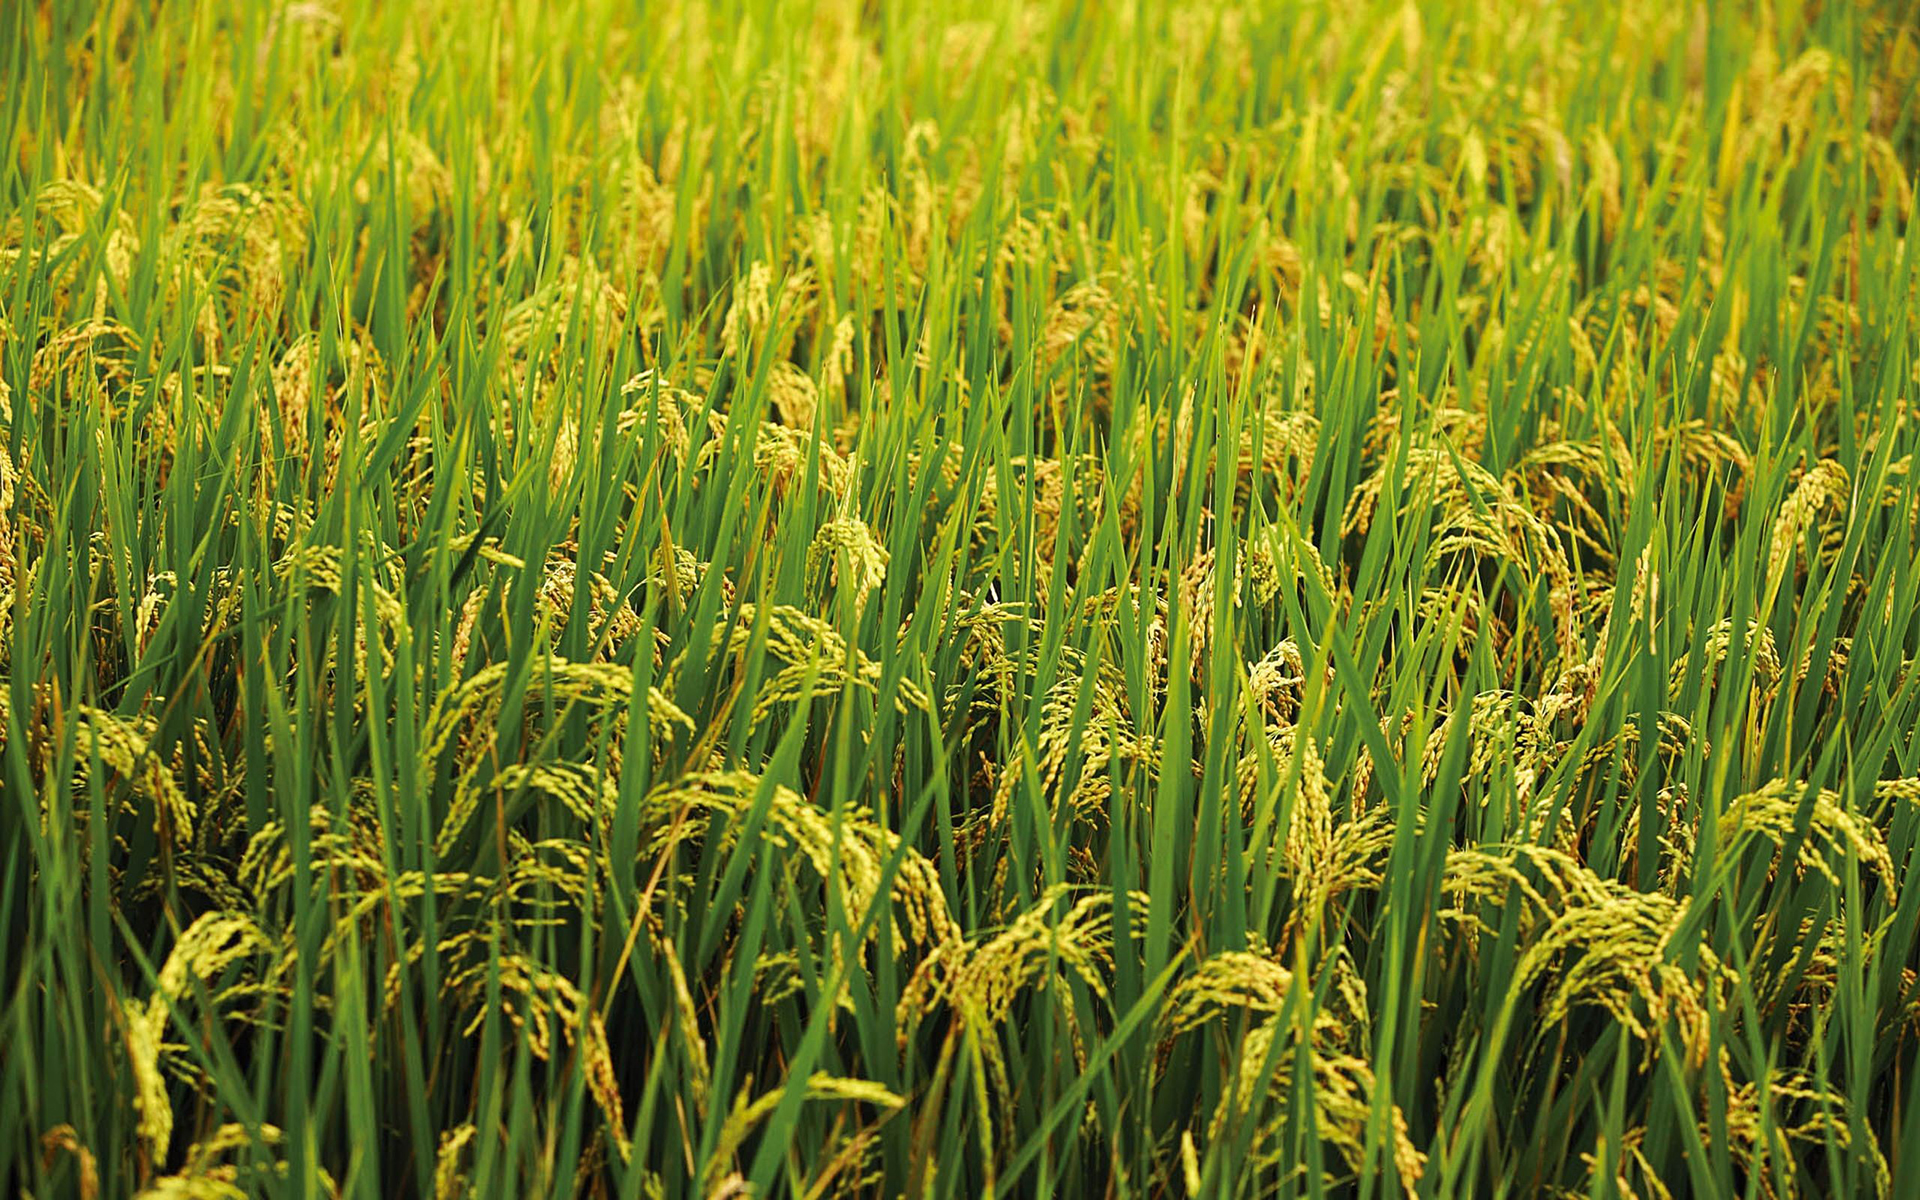 Rice Full Hd Wallpaper And Background Image 1920x1200 HD Wallpapers Download Free Map Images Wallpaper [wallpaper376.blogspot.com]